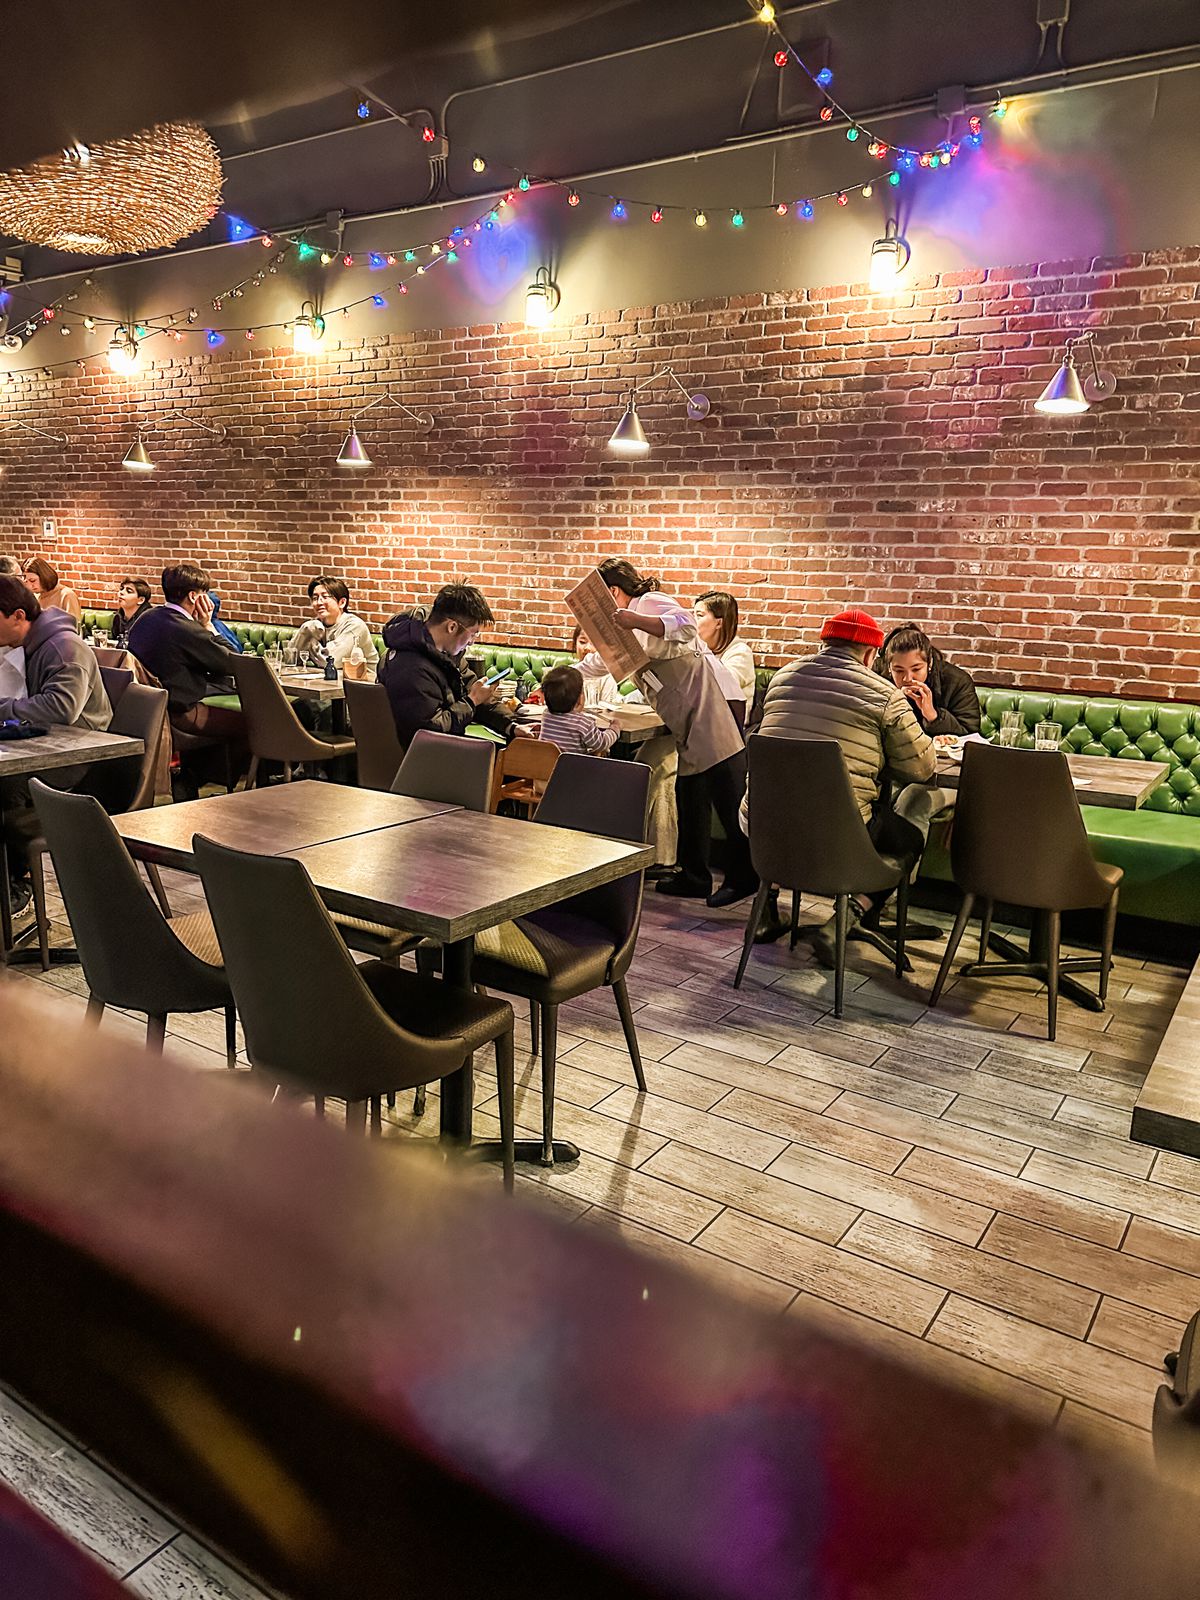 The interior of a busy sushi restaurant. Diners sit at tables against a brick wall with a string of holiday lights above.